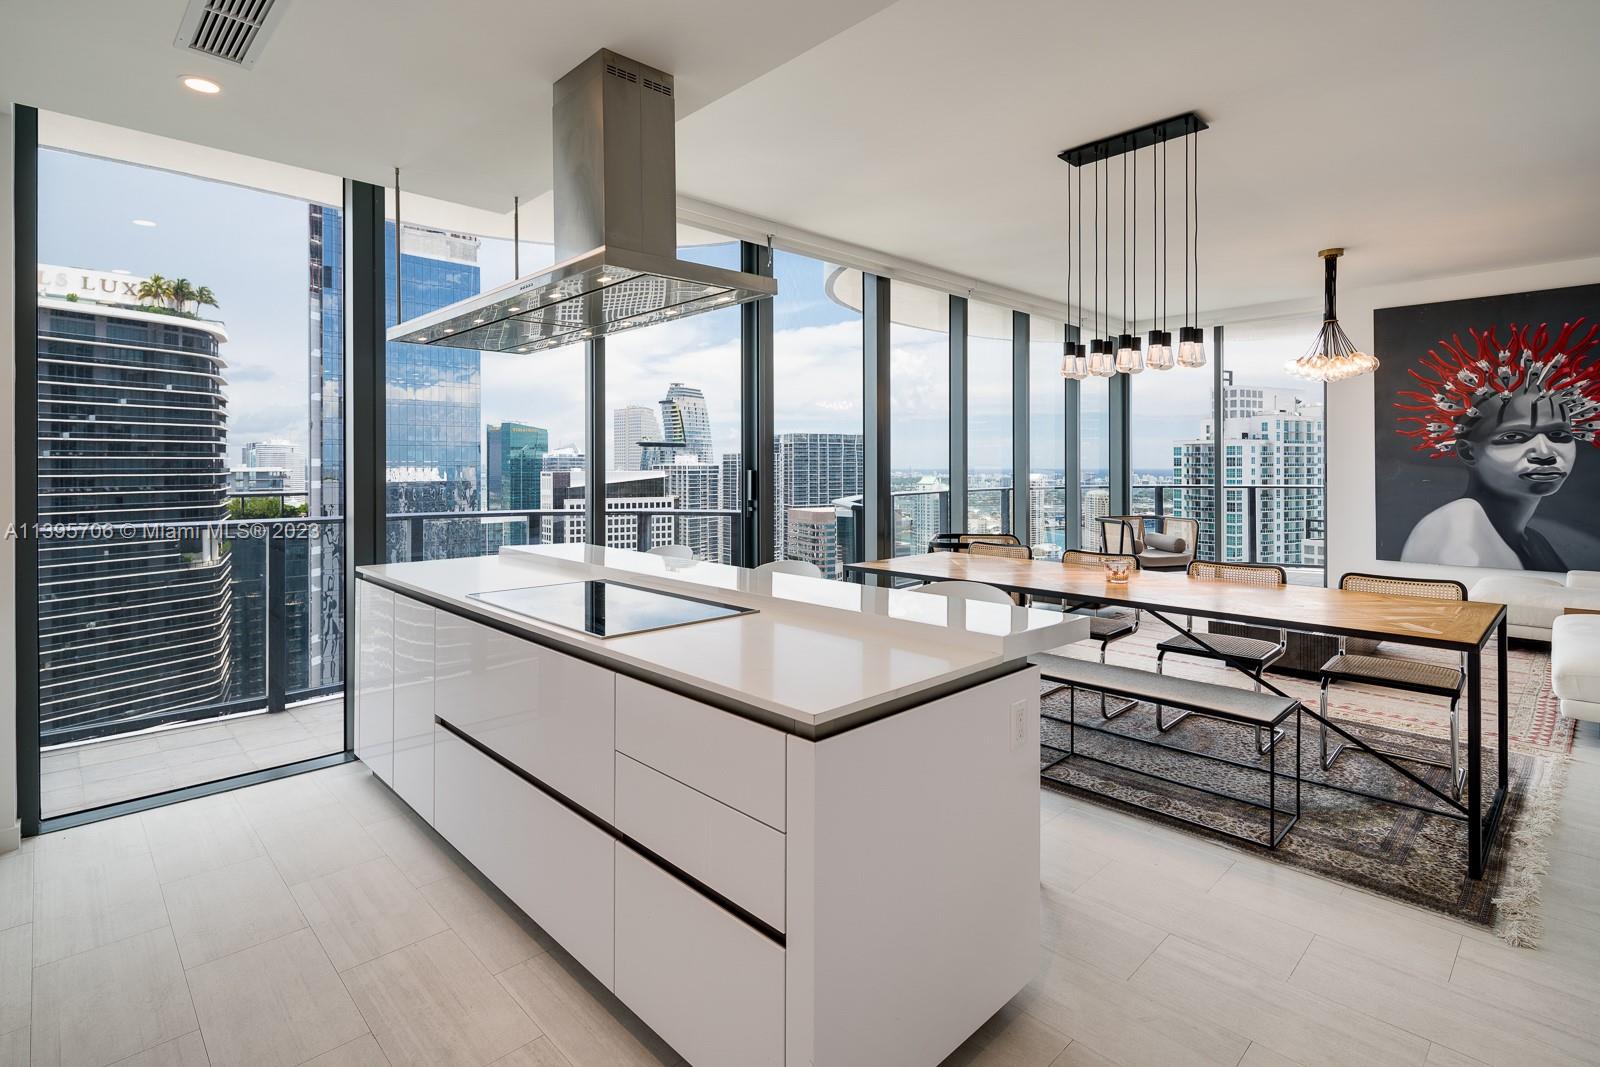 Perched high above Miami’s skyline sits PH5308 @ Flatiron, Brickell’s most desirable address. Clearing all adjacent buildings, PH5308 boasts rare EAST water views + privacy from its TWO expansive, wraparound balconies totaling 518sf. Known for its high-end finishes, this corner unit’s 10FT ceilings & natural light are perfect for entertaining w/10 windows surrounding the living area. Primary suite offers its own balcony, 2 closets & an oversized bath w/separate shower, tub & WC. Each suite has floor-to-ceiling windows w/access to balconies + en-suite bath. Miele appliances, Snaidero cabinetry.  Rooftop pool w/towel service, fitness center w/yoga & pilates, spa + steam/sauna, doorman service, kid’s room, theatre & lap pool. Steps to everything Brickell has to offer. 2 parking spcs + valet.